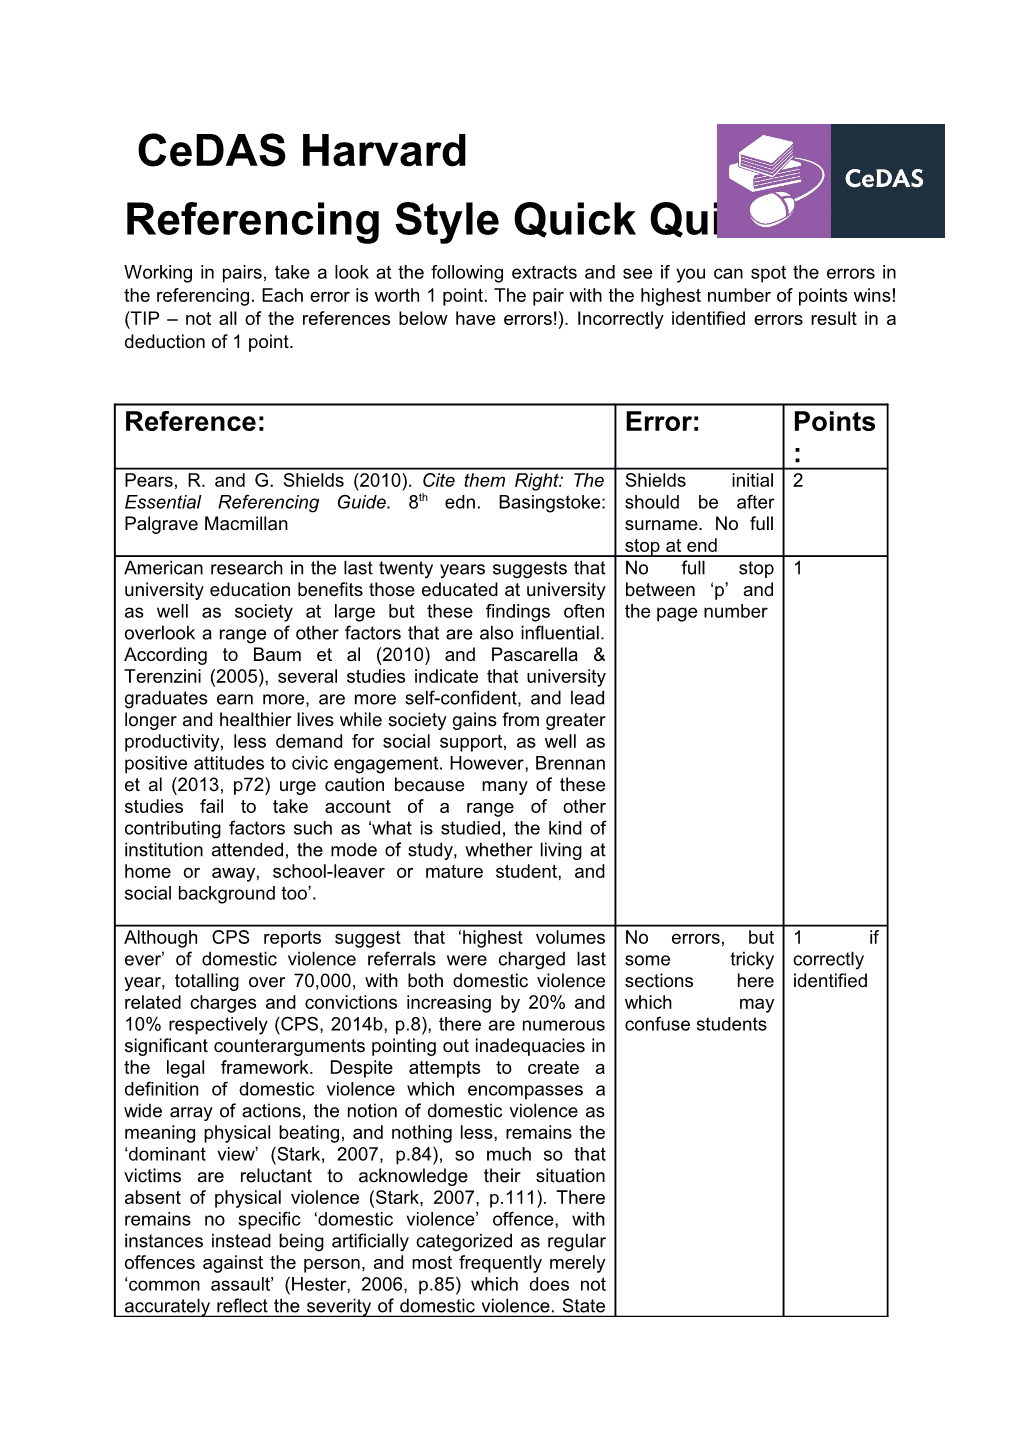 Referencing Style Quick Quiz